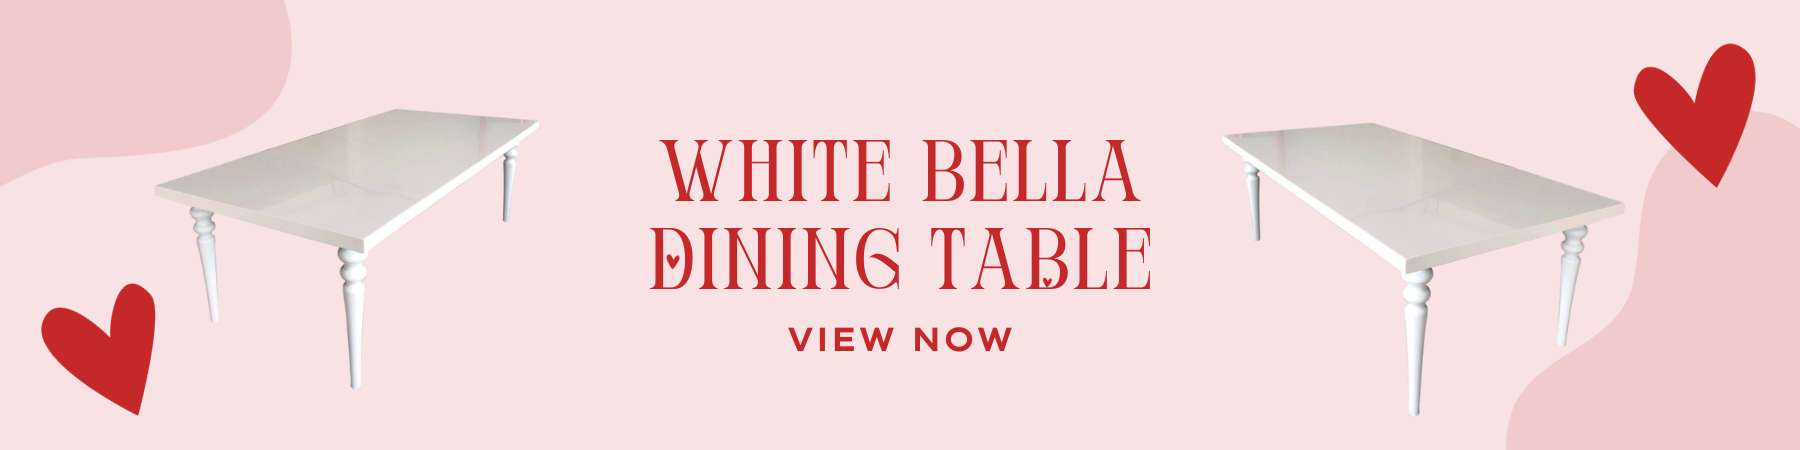 White Bella Dining Table